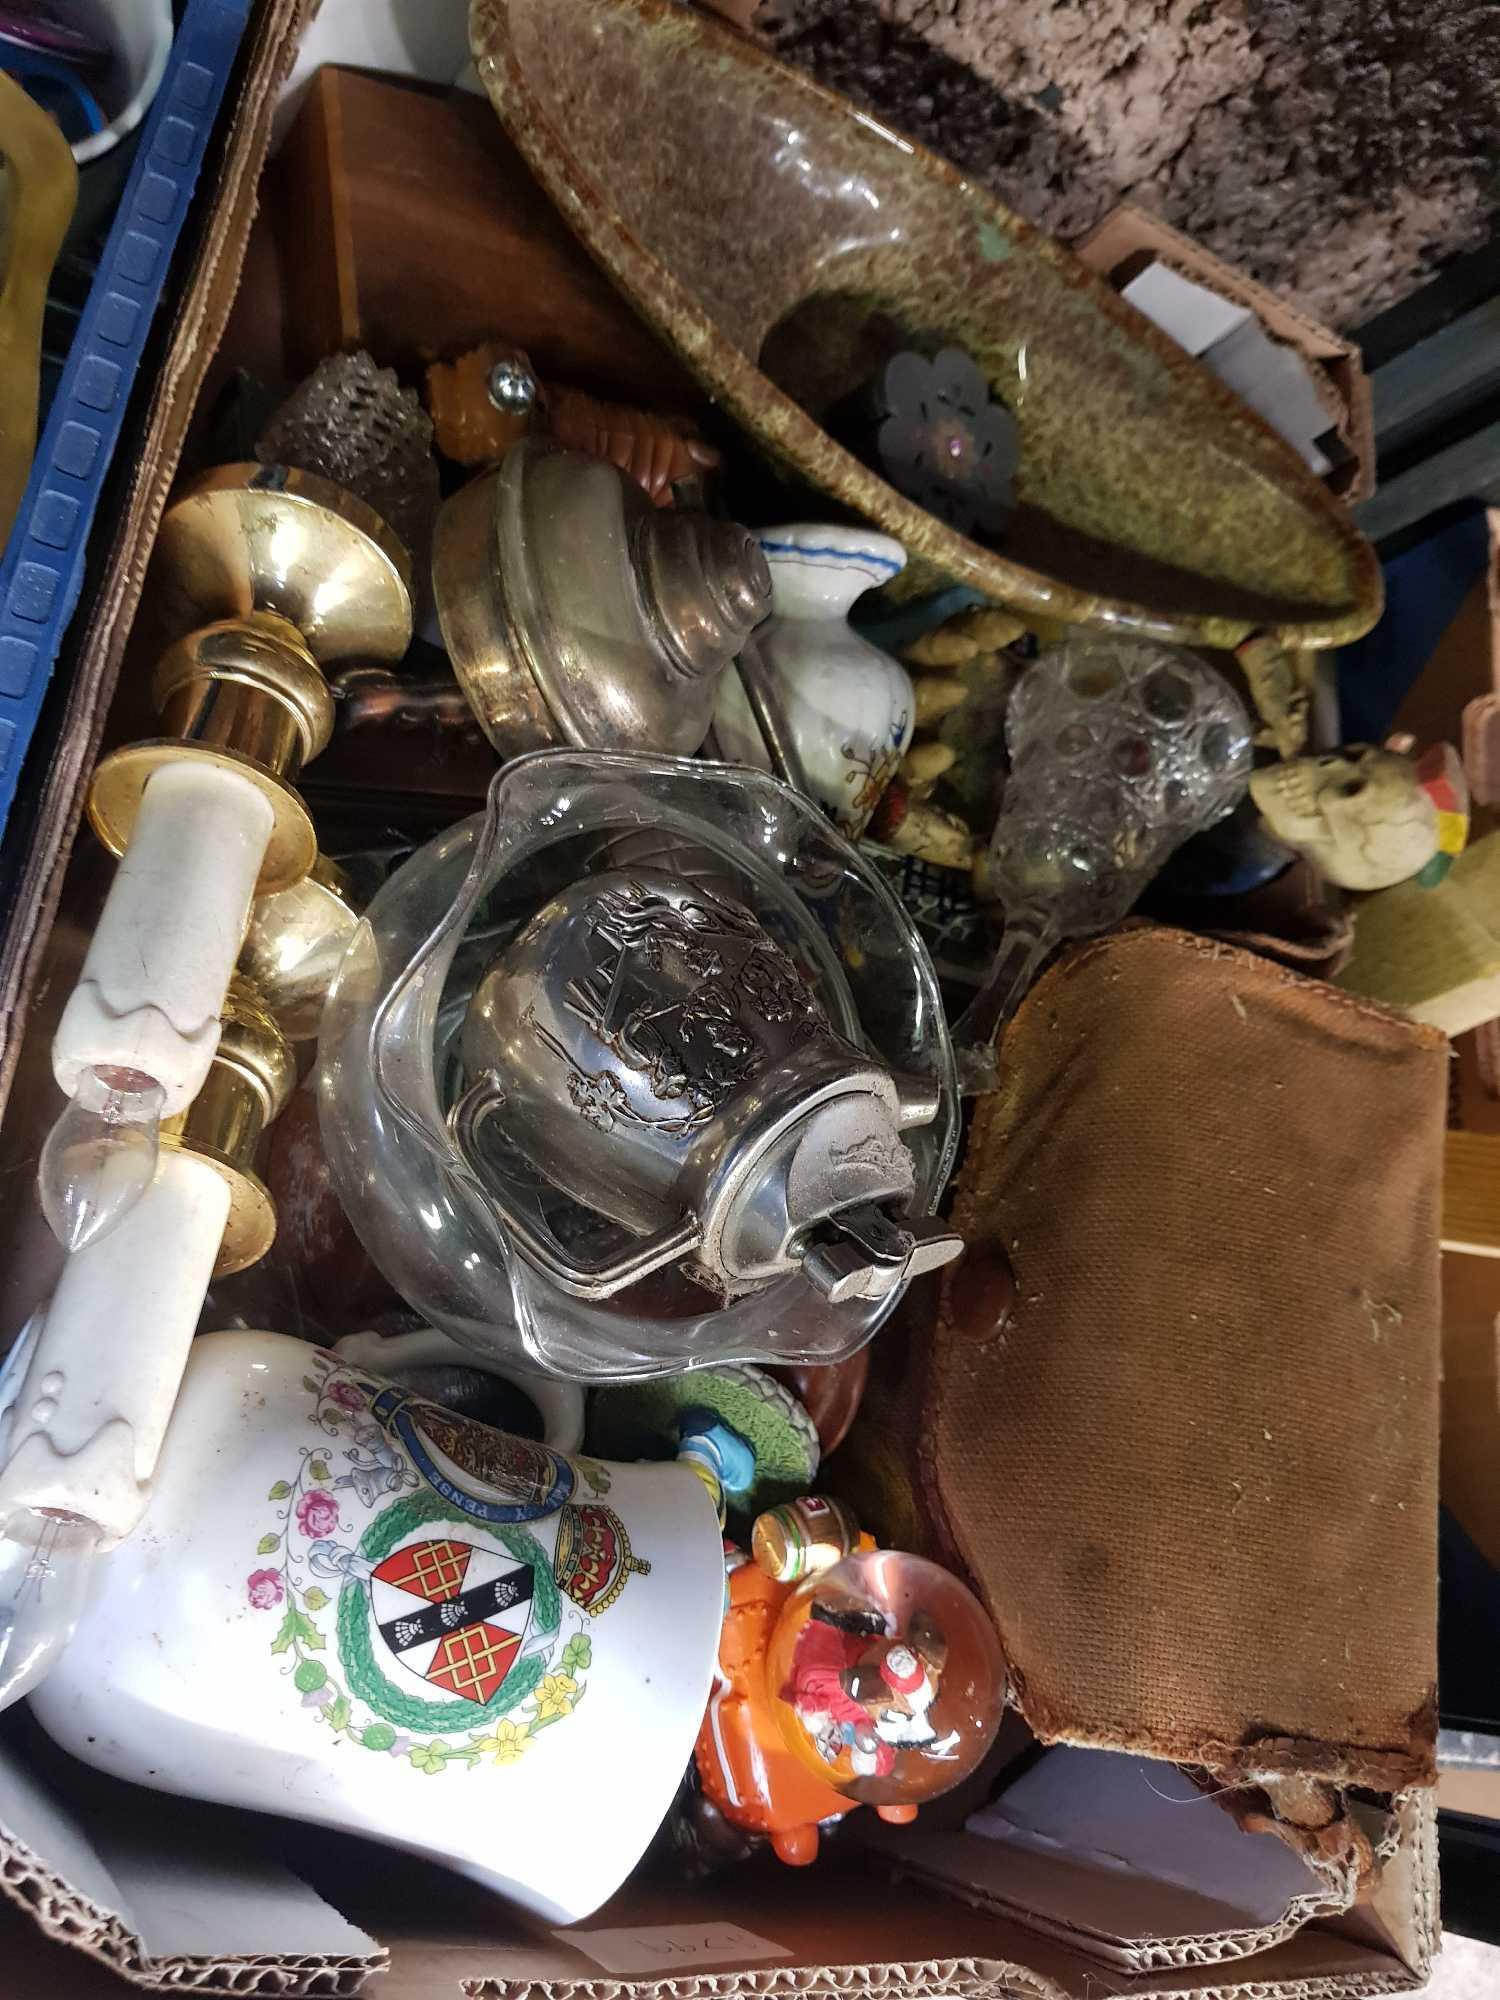 2 CARTONS OF MISC BRIC-A-BRAC INCL; ASHTRAYS, DISHES, BROWNIE BOX CAMERA ETC - Image 3 of 3